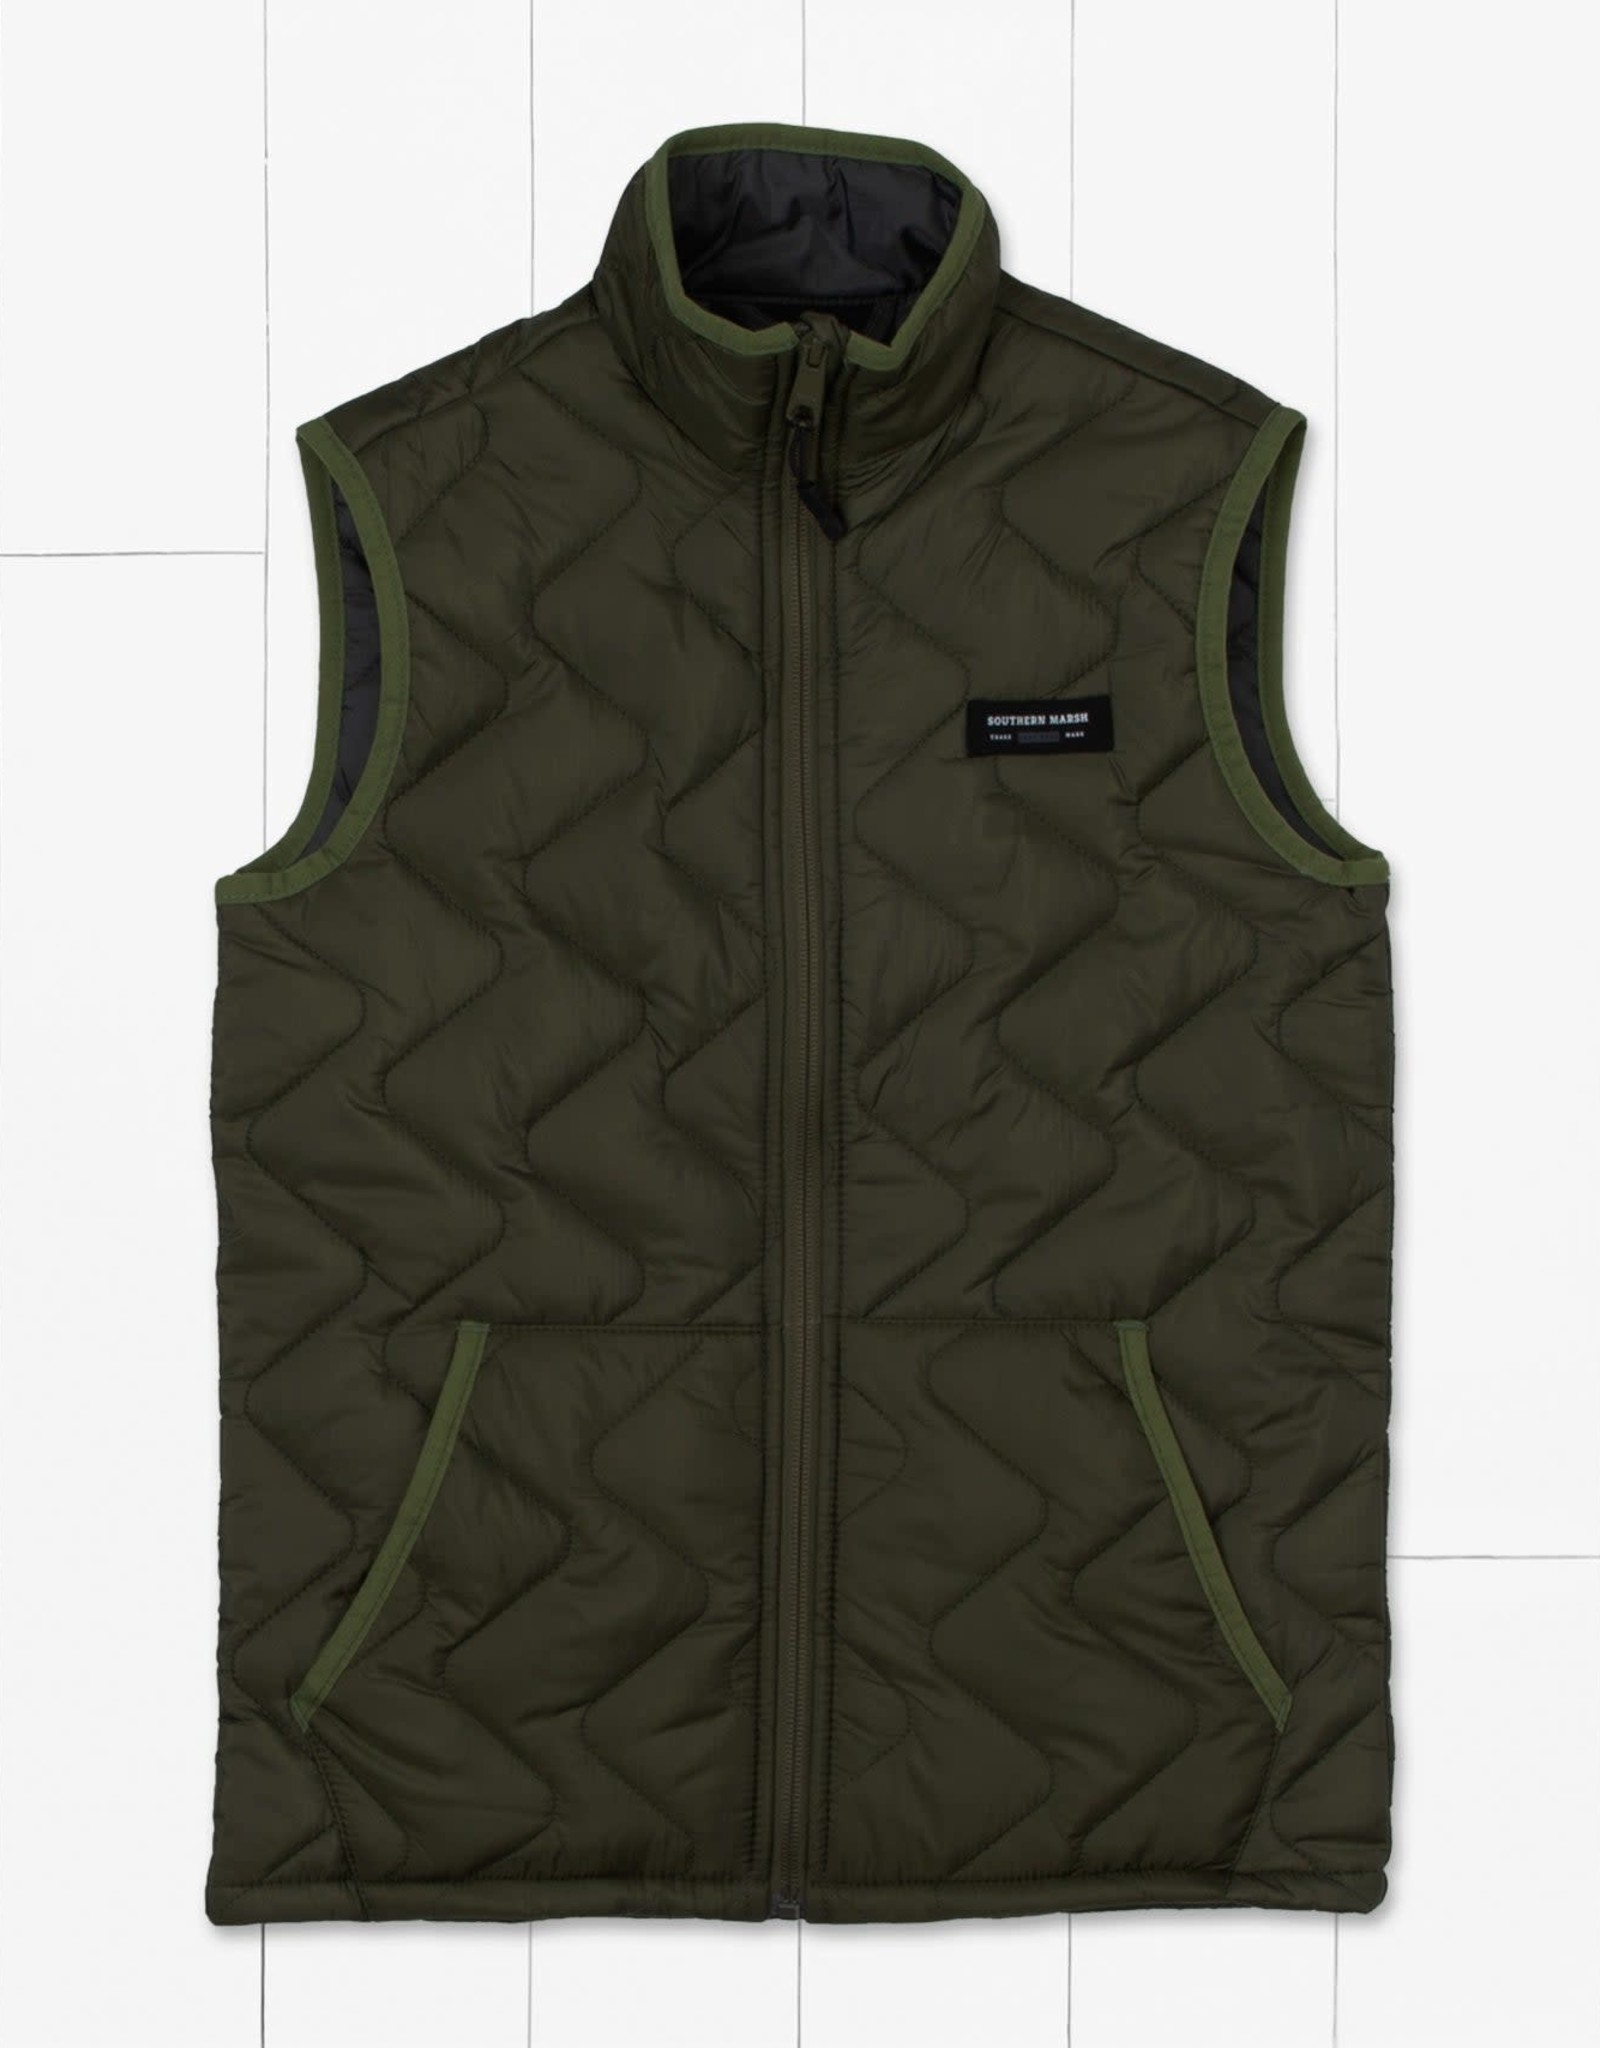 Southern Marsh OBQV - Broussard Quilted Vest